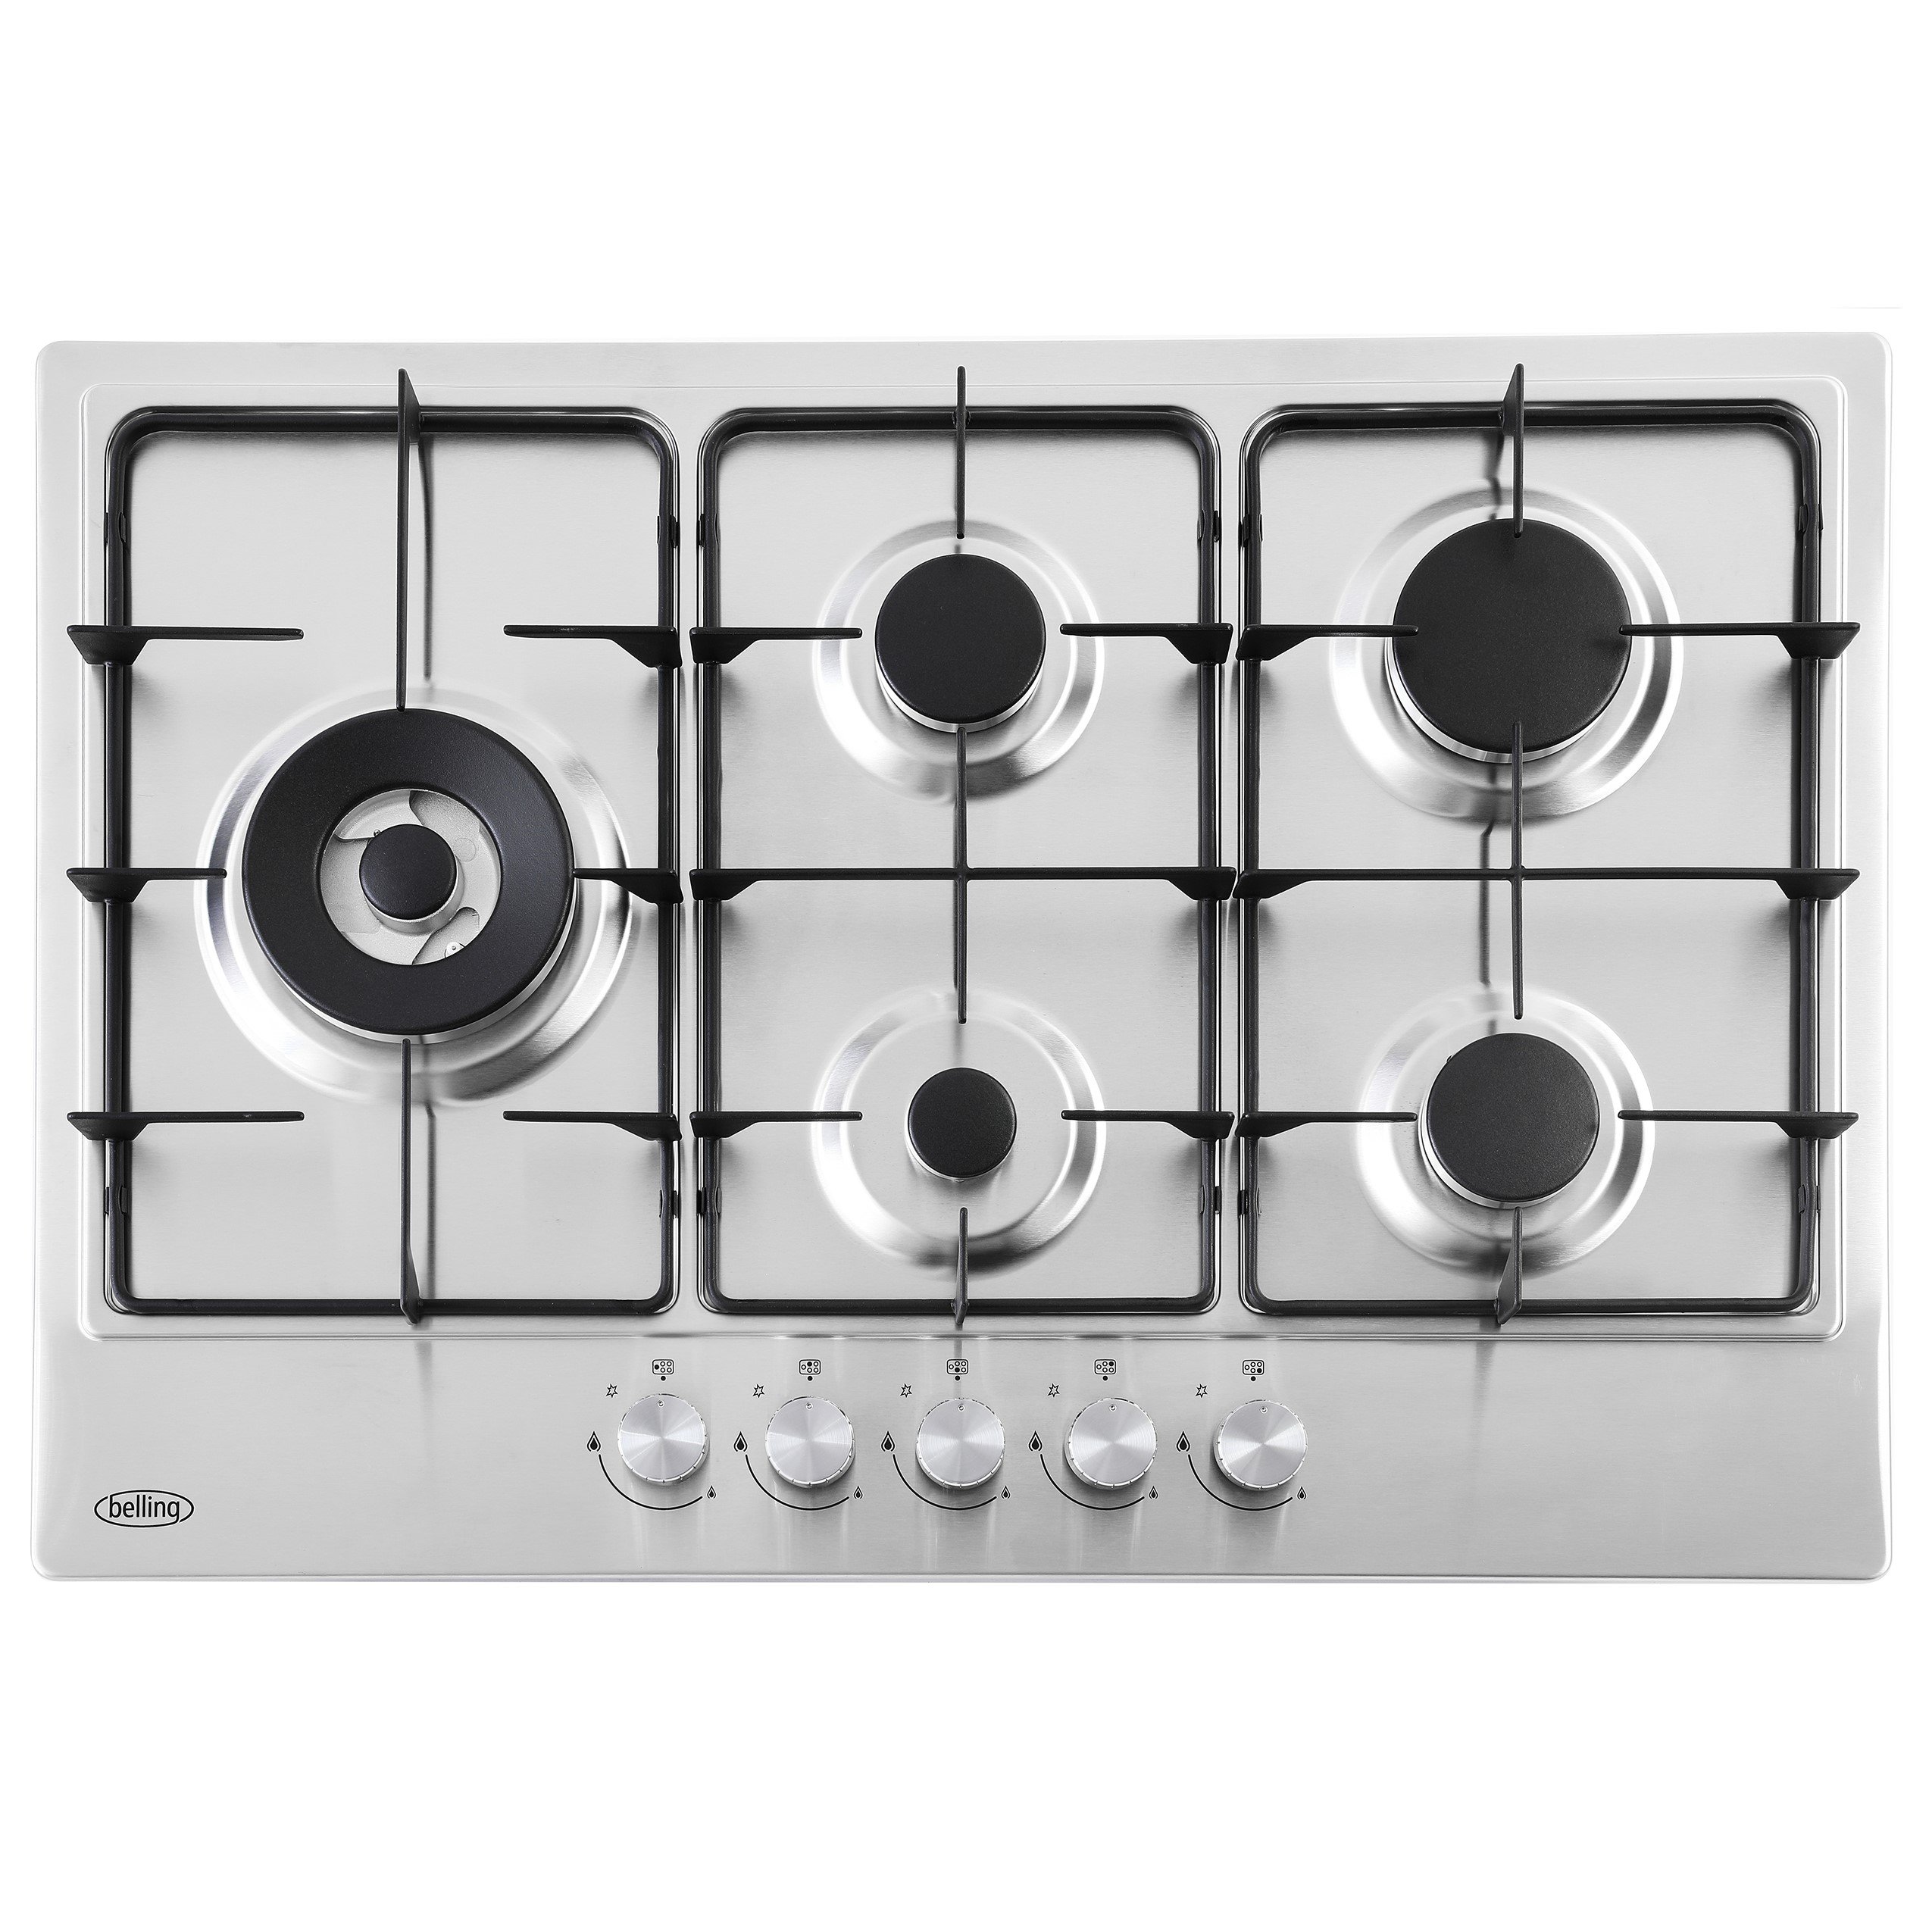 75cm stainless steel gas hob with powerful 3.6kW wok burner and ribbon iron pan supports